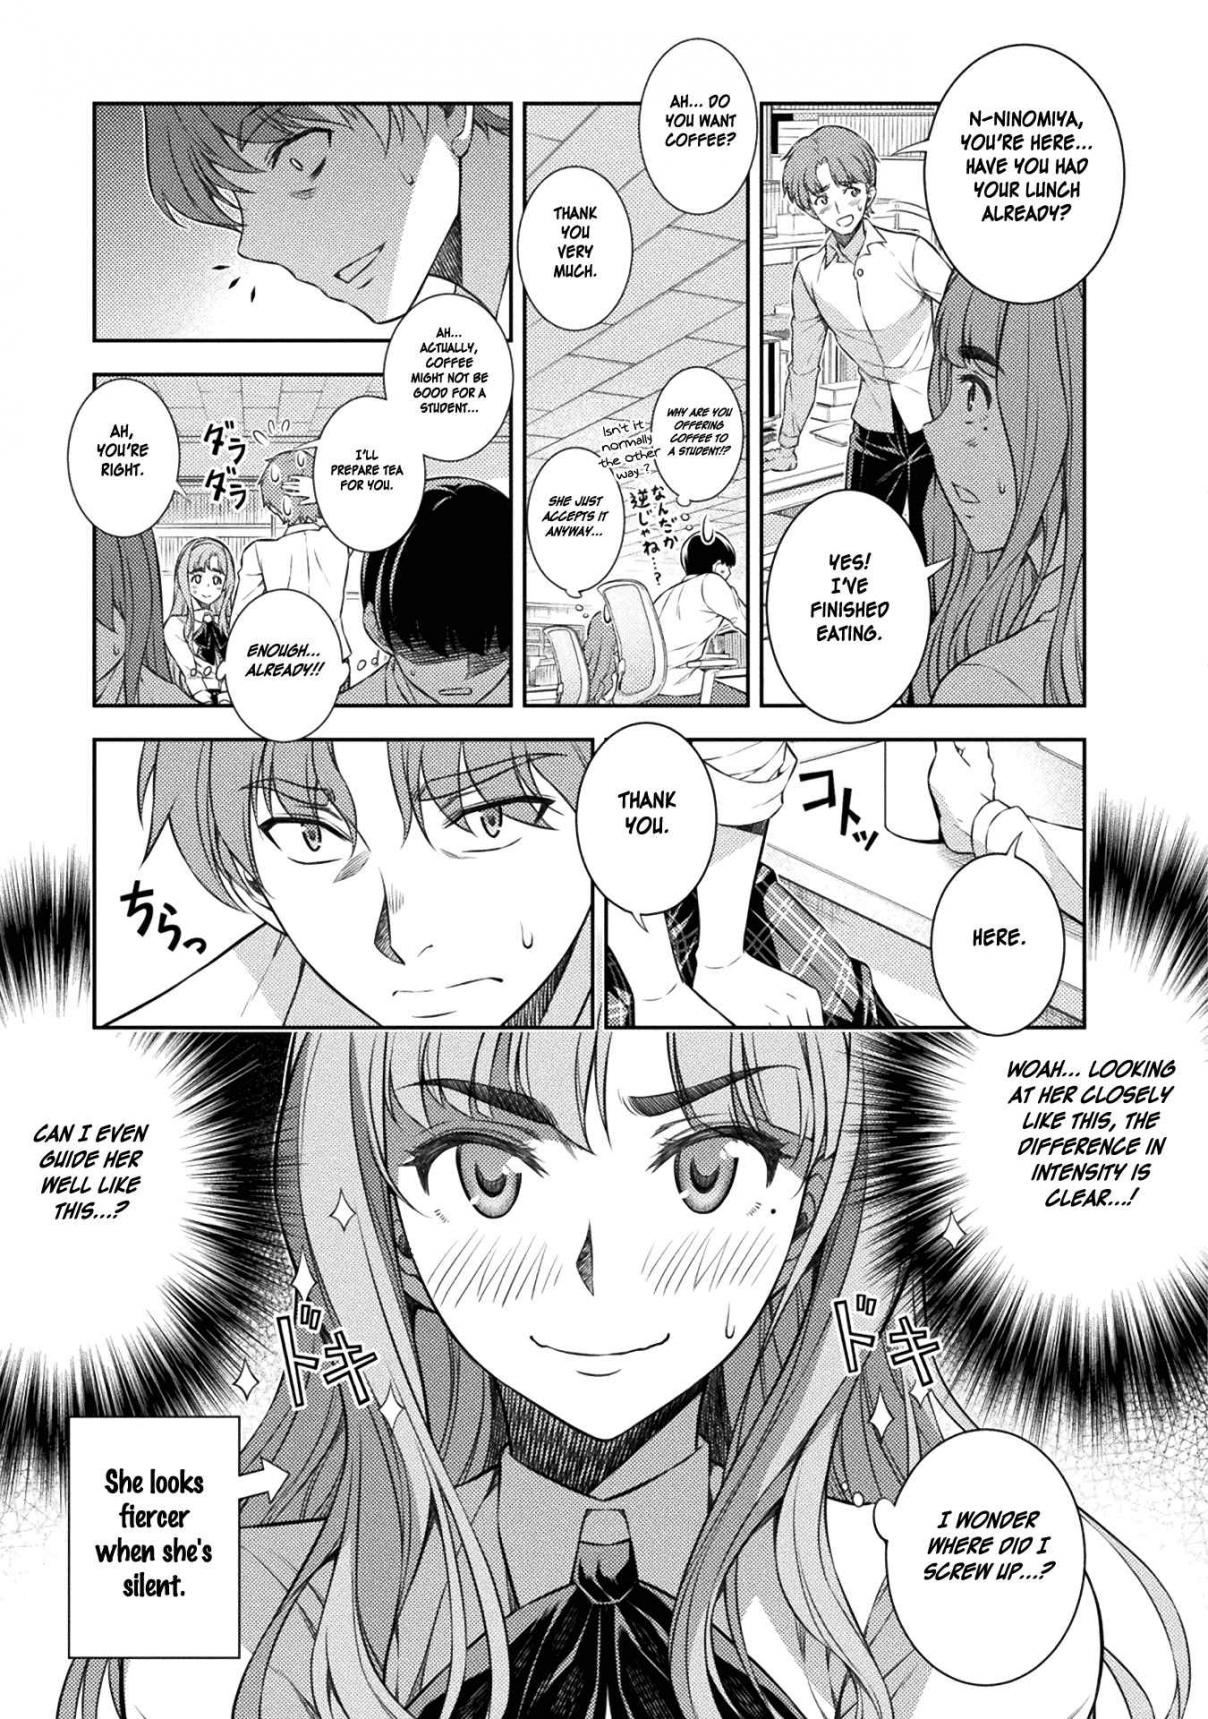 Silver Plan to Redo From JK Vol. 1 Ch. 3 I Want to be a Good Girl